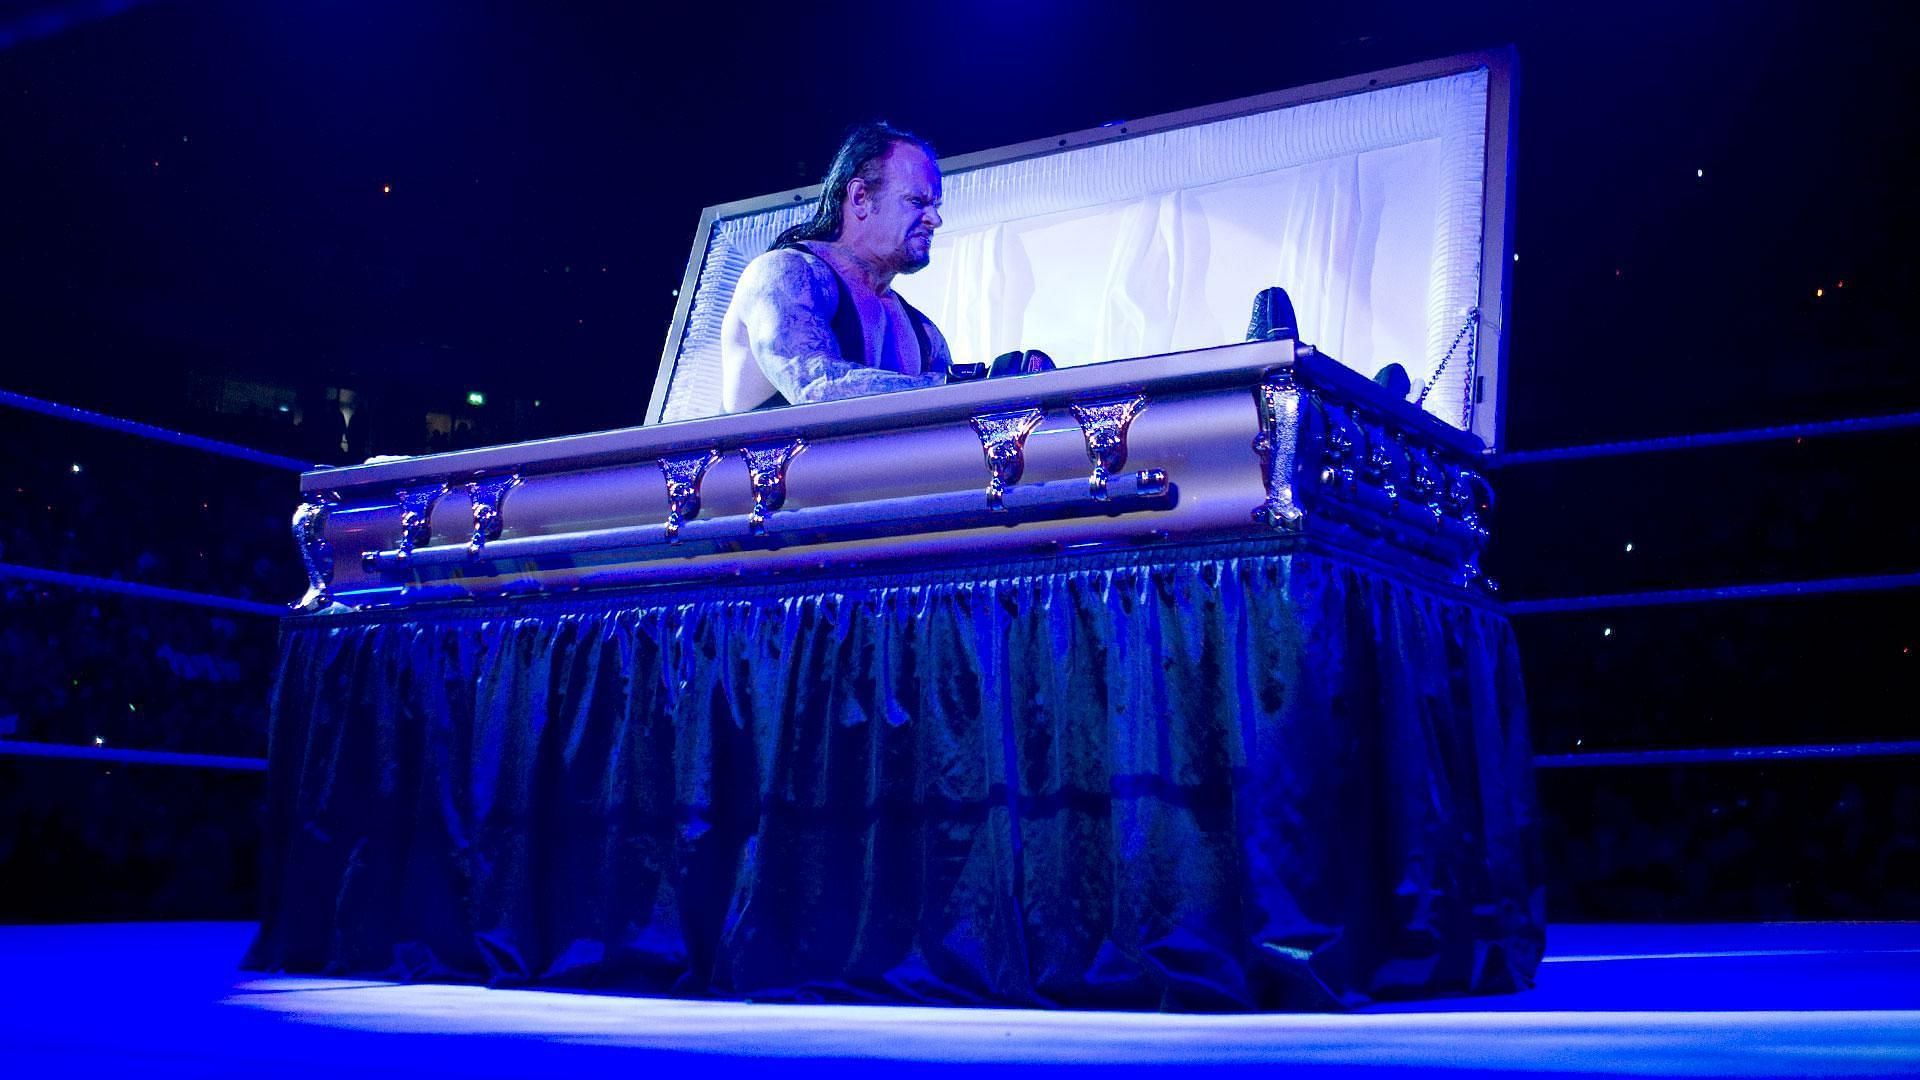 WWE News: The Godfather smoked in The Undertaker's coffin